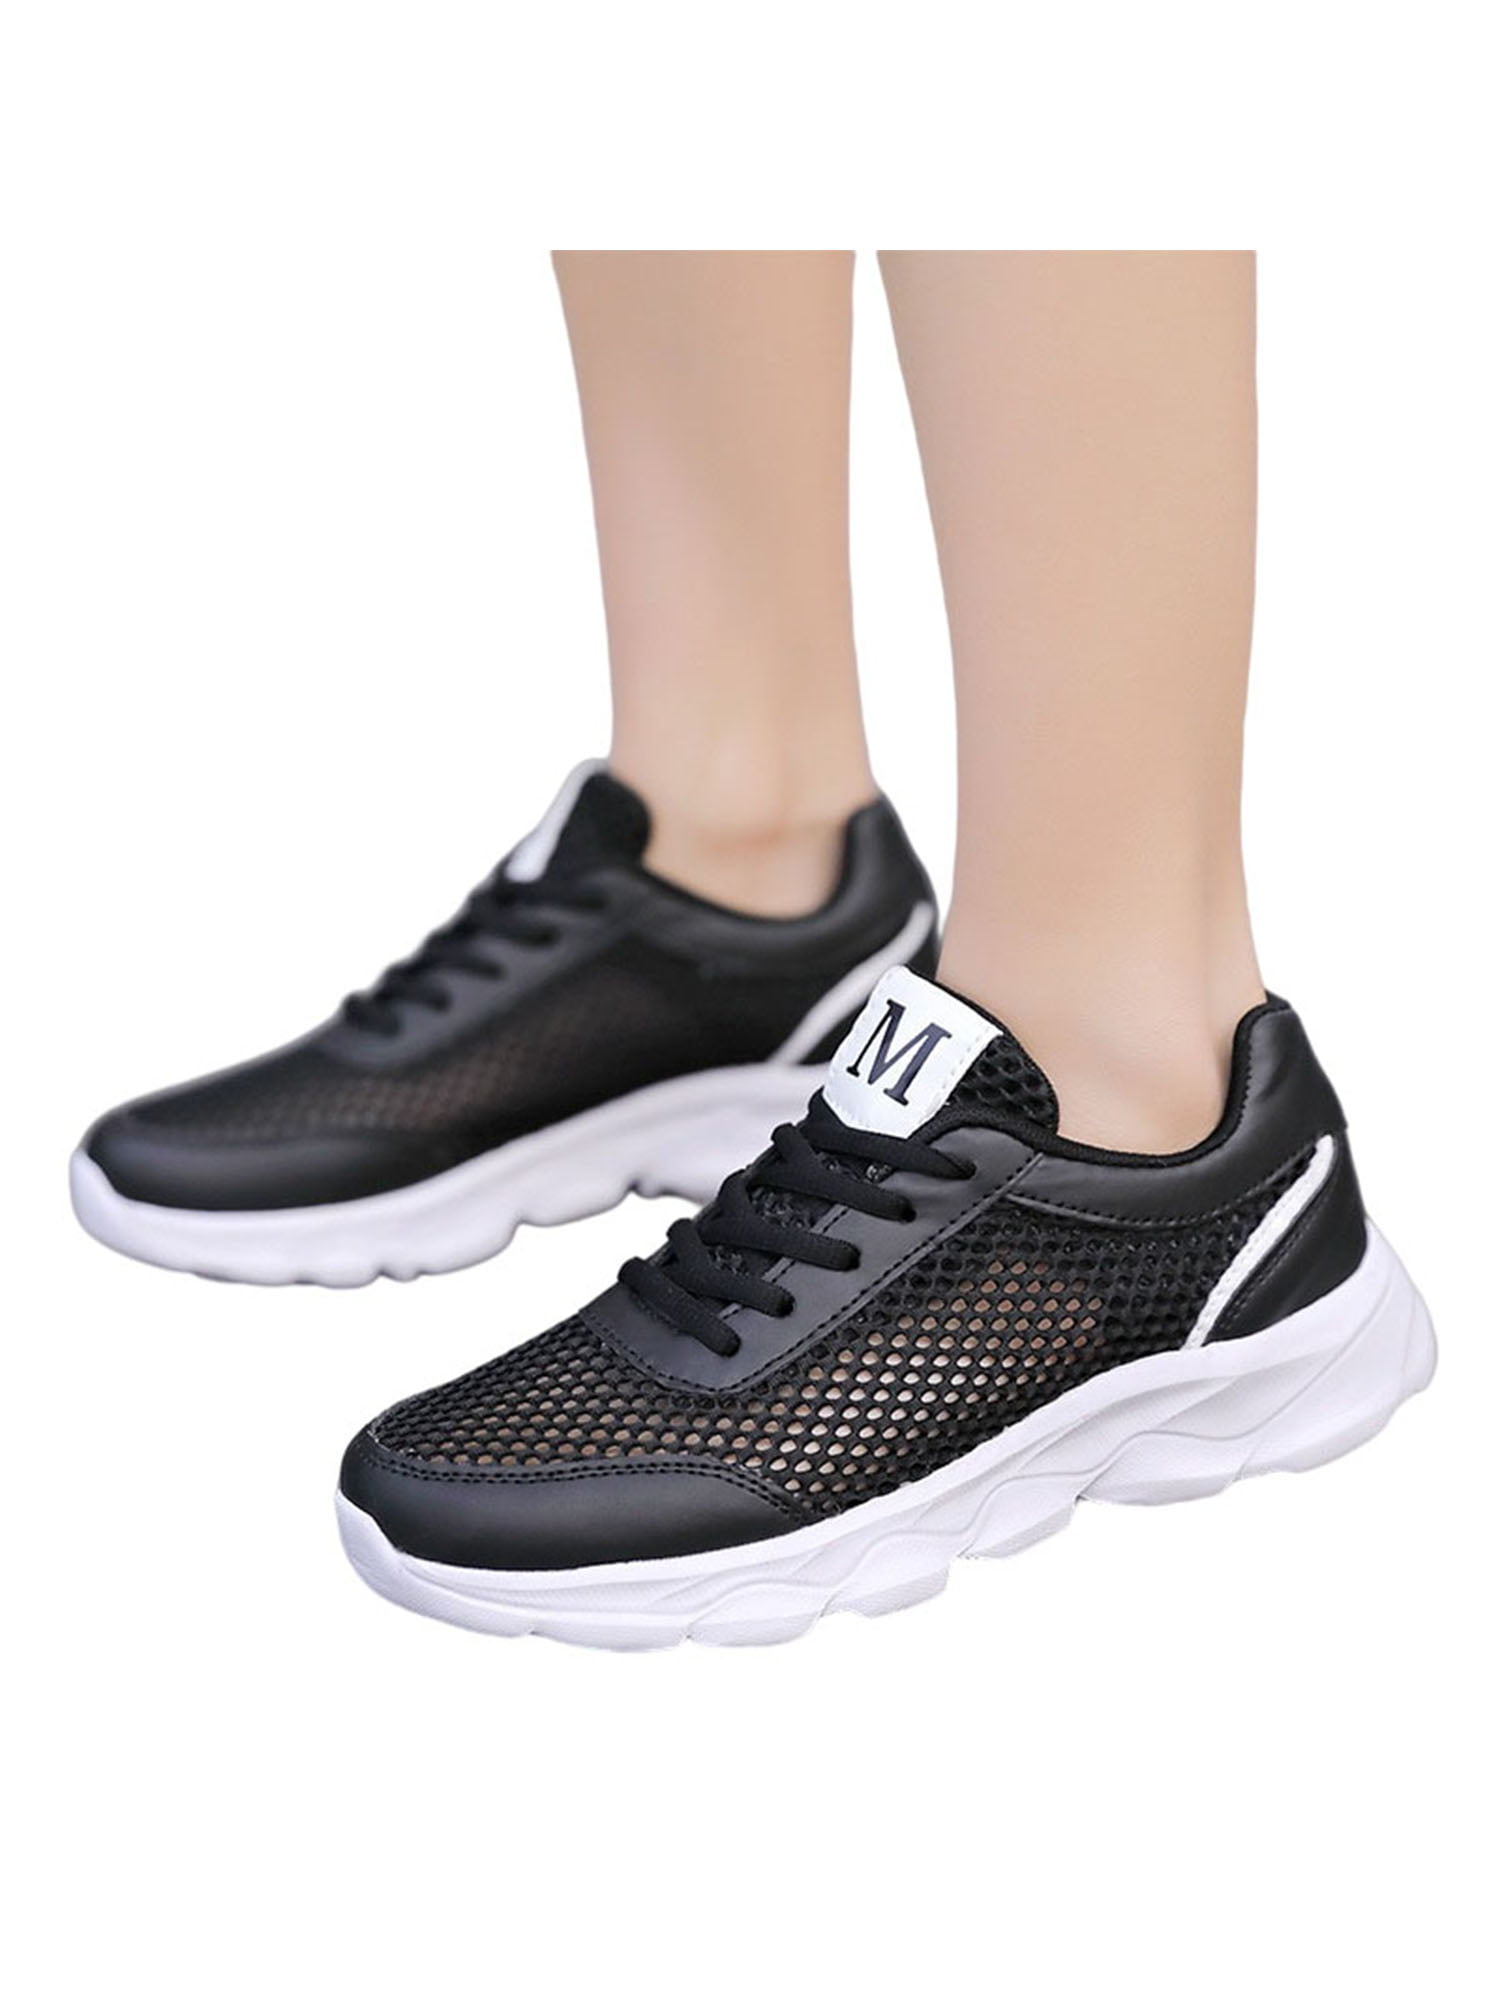 Womens Ladies Trainers Lace-up Fitness Sports Shoes Athletic Running Sneakers